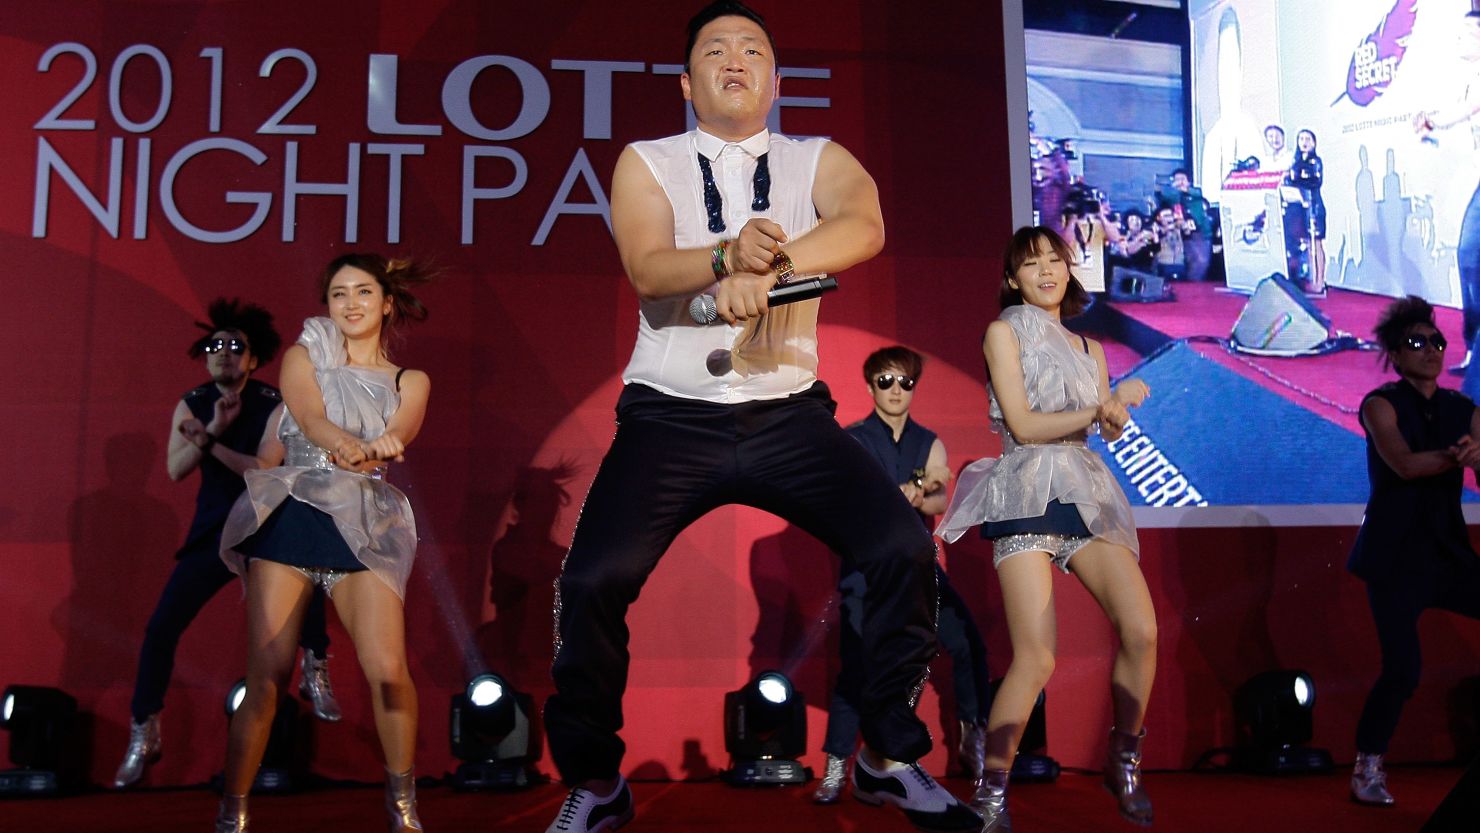 The video for Psy's "Gangnam Style" has racked up over 400 million hits on YouTube.